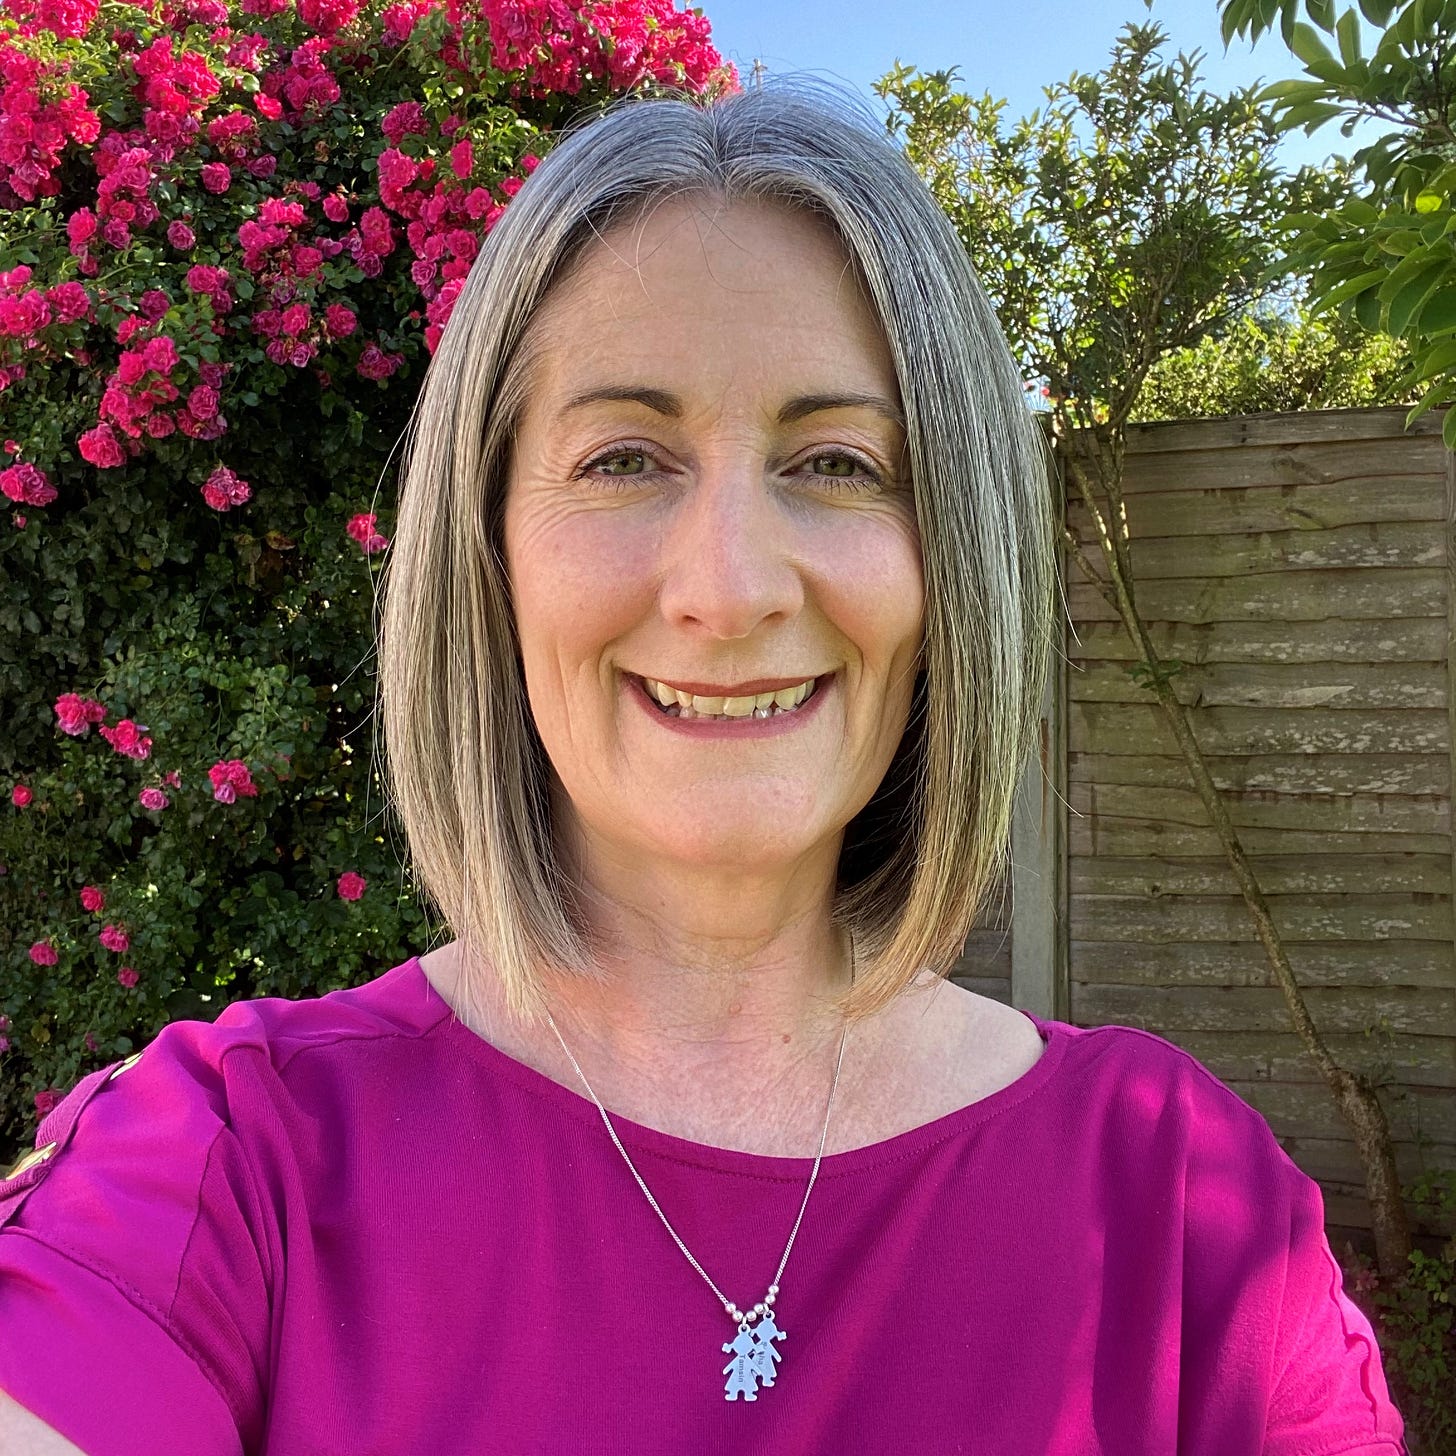 head and shoulders of Steph, grey haired 51 year old mum wearing pink top and smiling